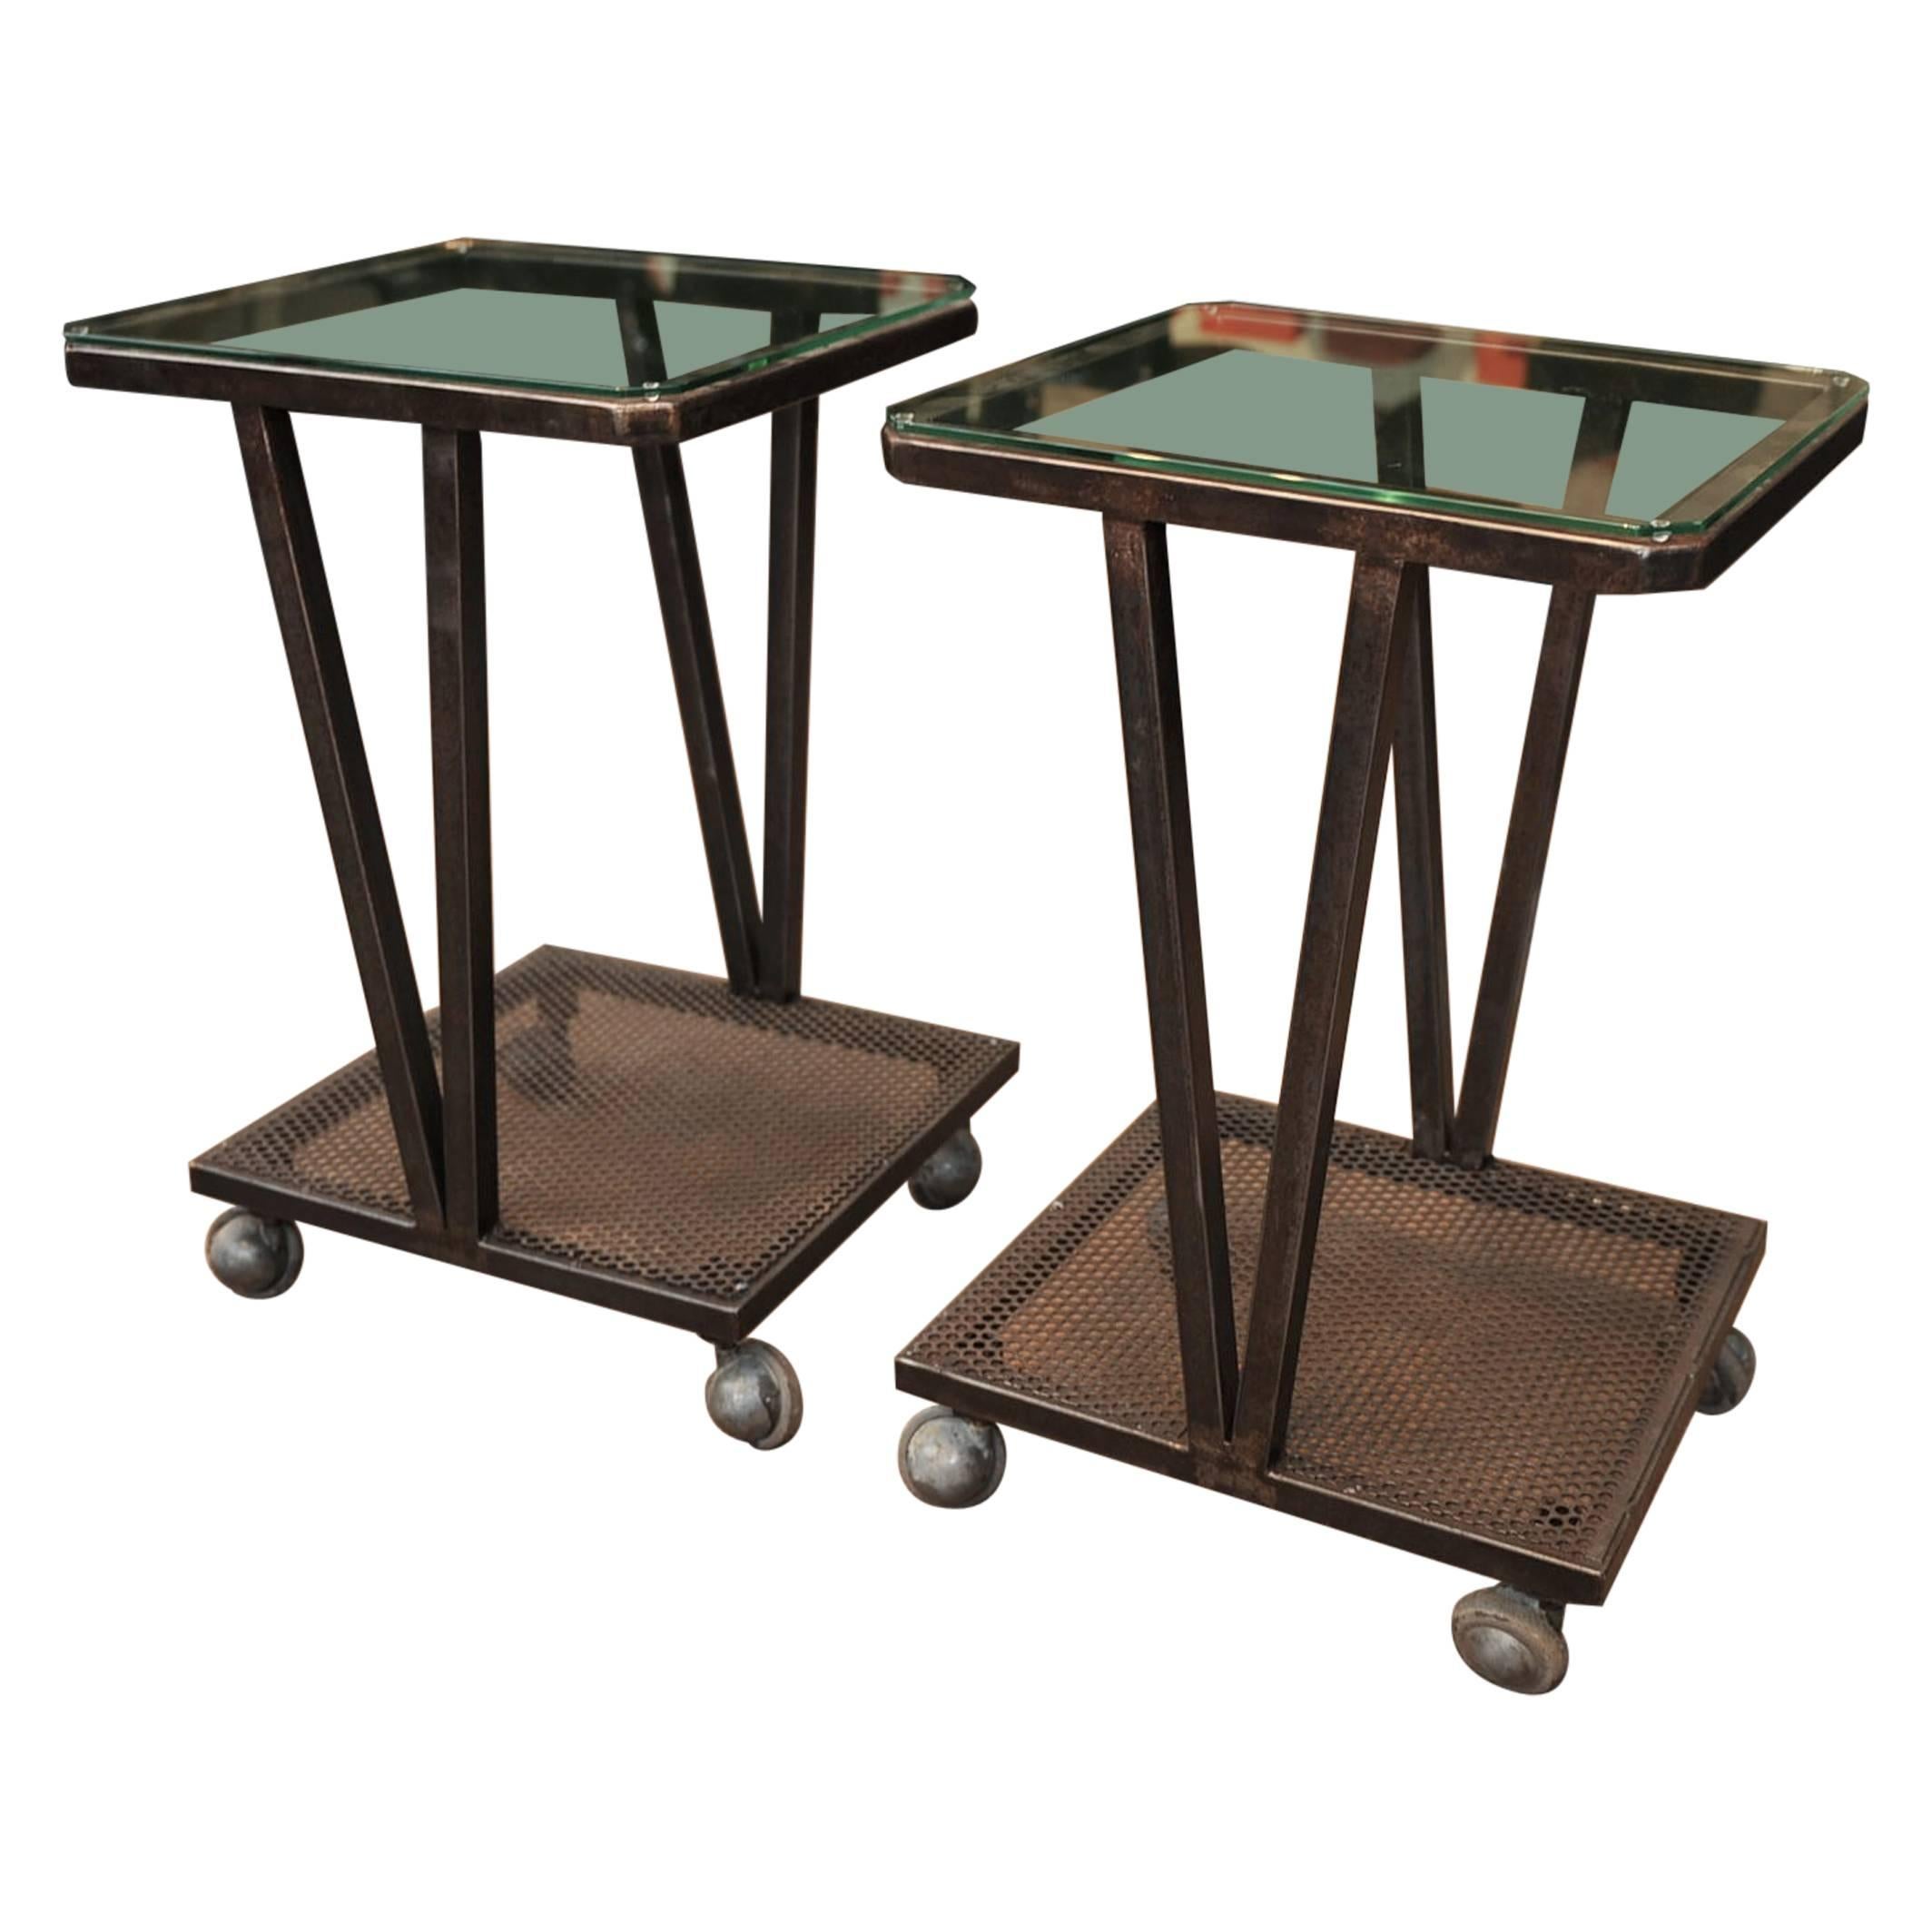 Pair of French Industrial Iron and Glass Sides Tables on Wheels